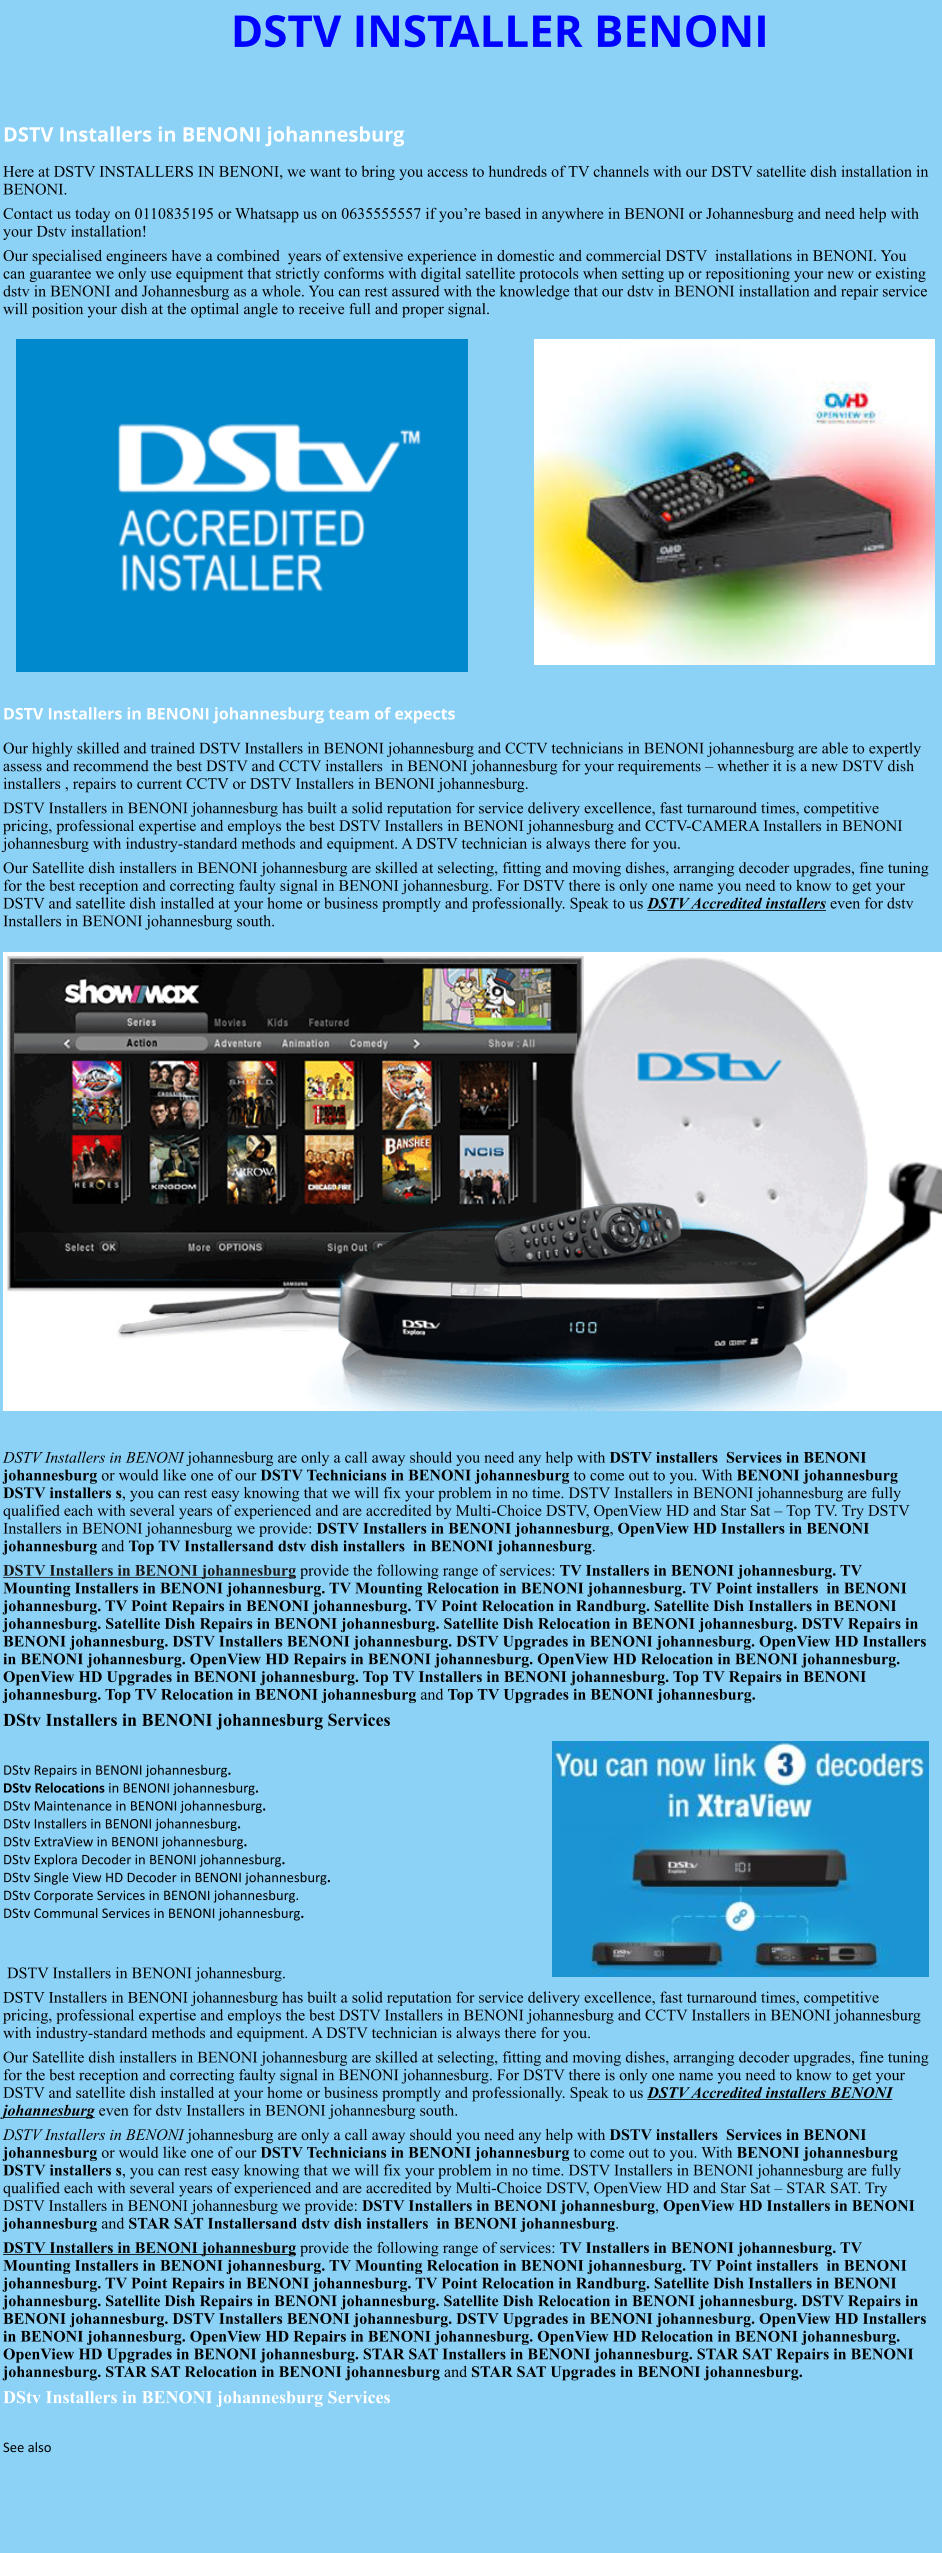 DSTV INSTALLER BENONI  DSTV Installers in BENONI johannesburg  Here at DSTV INSTALLERS IN BENONI, we want to bring you access to hundreds of TV channels with our DSTV satellite dish installation in BENONI. Contact us today on 0110835195 or Whatsapp us on 0635555557 if you’re based in anywhere in BENONI or Johannesburg and need help with your Dstv installation! Our specialised engineers have a combined  years of extensive experience in domestic and commercial DSTV  installations in BENONI. You can guarantee we only use equipment that strictly conforms with digital satellite protocols when setting up or repositioning your new or existing dstv in BENONI and Johannesburg as a whole. You can rest assured with the knowledge that our dstv in BENONI installation and repair service will position your dish at the optimal angle to receive full and proper signal.                DSTV Installers in BENONI johannesburg team of expects Our highly skilled and trained DSTV Installers in BENONI johannesburg and CCTV technicians in BENONI johannesburg are able to expertly assess and recommend the best DSTV and CCTV installers  in BENONI johannesburg for your requirements – whether it is a new DSTV dish installers , repairs to current CCTV or DSTV Installers in BENONI johannesburg. DSTV Installers in BENONI johannesburg has built a solid reputation for service delivery excellence, fast turnaround times, competitive pricing, professional expertise and employs the best DSTV Installers in BENONI johannesburg and CCTV-CAMERA Installers in BENONI johannesburg with industry-standard methods and equipment. A DSTV technician is always there for you. Our Satellite dish installers in BENONI johannesburg are skilled at selecting, fitting and moving dishes, arranging decoder upgrades, fine tuning for the best reception and correcting faulty signal in BENONI johannesburg. For DSTV there is only one name you need to know to get your DSTV and satellite dish installed at your home or business promptly and professionally. Speak to us DSTV Accredited installers even for dstv Installers in BENONI johannesburg south.                      DSTV Installers in BENONI johannesburg are only a call away should you need any help with DSTV installers  Services in BENONI johannesburg or would like one of our DSTV Technicians in BENONI johannesburg to come out to you. With BENONI johannesburg DSTV installers s, you can rest easy knowing that we will fix your problem in no time. DSTV Installers in BENONI johannesburg are fully qualified each with several years of experienced and are accredited by Multi-Choice DSTV, OpenView HD and Star Sat – Top TV. Try DSTV Installers in BENONI johannesburg we provide: DSTV Installers in BENONI johannesburg, OpenView HD Installers in BENONI johannesburg and Top TV Installersand dstv dish installers  in BENONI johannesburg. DSTV Installers in BENONI johannesburg provide the following range of services: TV Installers in BENONI johannesburg. TV Mounting Installers in BENONI johannesburg. TV Mounting Relocation in BENONI johannesburg. TV Point installers  in BENONI johannesburg. TV Point Repairs in BENONI johannesburg. TV Point Relocation in Randburg. Satellite Dish Installers in BENONI johannesburg. Satellite Dish Repairs in BENONI johannesburg. Satellite Dish Relocation in BENONI johannesburg. DSTV Repairs in BENONI johannesburg. DSTV Installers BENONI johannesburg. DSTV Upgrades in BENONI johannesburg. OpenView HD Installers in BENONI johannesburg. OpenView HD Repairs in BENONI johannesburg. OpenView HD Relocation in BENONI johannesburg. OpenView HD Upgrades in BENONI johannesburg. Top TV Installers in BENONI johannesburg. Top TV Repairs in BENONI johannesburg. Top TV Relocation in BENONI johannesburg and Top TV Upgrades in BENONI johannesburg. DStv Installers in BENONI johannesburg Services  DStv Repairs in BENONI johannesburg.  DStv Relocations in BENONI johannesburg.  DStv Maintenance in BENONI johannesburg. DStv Installers in BENONI johannesburg. DStv ExtraView in BENONI johannesburg. DStv Explora Decoder in BENONI johannesburg. DStv Single View HD Decoder in BENONI johannesburg. DStv Corporate Services in BENONI johannesburg. DStv Communal Services in BENONI johannesburg.    DSTV Installers in BENONI johannesburg. DSTV Installers in BENONI johannesburg has built a solid reputation for service delivery excellence, fast turnaround times, competitive pricing, professional expertise and employs the best DSTV Installers in BENONI johannesburg and CCTV Installers in BENONI johannesburg with industry-standard methods and equipment. A DSTV technician is always there for you. Our Satellite dish installers in BENONI johannesburg are skilled at selecting, fitting and moving dishes, arranging decoder upgrades, fine tuning for the best reception and correcting faulty signal in BENONI johannesburg. For DSTV there is only one name you need to know to get your DSTV and satellite dish installed at your home or business promptly and professionally. Speak to us DSTV Accredited installers BENONI johannesburg even for dstv Installers in BENONI johannesburg south. DSTV Installers in BENONI johannesburg are only a call away should you need any help with DSTV installers  Services in BENONI johannesburg or would like one of our DSTV Technicians in BENONI johannesburg to come out to you. With BENONI johannesburg DSTV installers s, you can rest easy knowing that we will fix your problem in no time. DSTV Installers in BENONI johannesburg are fully qualified each with several years of experienced and are accredited by Multi-Choice DSTV, OpenView HD and Star Sat – STAR SAT. Try DSTV Installers in BENONI johannesburg we provide: DSTV Installers in BENONI johannesburg, OpenView HD Installers in BENONI johannesburg and STAR SAT Installersand dstv dish installers  in BENONI johannesburg. DSTV Installers in BENONI johannesburg provide the following range of services: TV Installers in BENONI johannesburg. TV Mounting Installers in BENONI johannesburg. TV Mounting Relocation in BENONI johannesburg. TV Point installers  in BENONI johannesburg. TV Point Repairs in BENONI johannesburg. TV Point Relocation in Randburg. Satellite Dish Installers in BENONI johannesburg. Satellite Dish Repairs in BENONI johannesburg. Satellite Dish Relocation in BENONI johannesburg. DSTV Repairs in BENONI johannesburg. DSTV Installers BENONI johannesburg. DSTV Upgrades in BENONI johannesburg. OpenView HD Installers in BENONI johannesburg. OpenView HD Repairs in BENONI johannesburg. OpenView HD Relocation in BENONI johannesburg. OpenView HD Upgrades in BENONI johannesburg. STAR SAT Installers in BENONI johannesburg. STAR SAT Repairs in BENONI johannesburg. STAR SAT Relocation in BENONI johannesburg and STAR SAT Upgrades in BENONI johannesburg. DStv Installers in BENONI johannesburg Services  See also